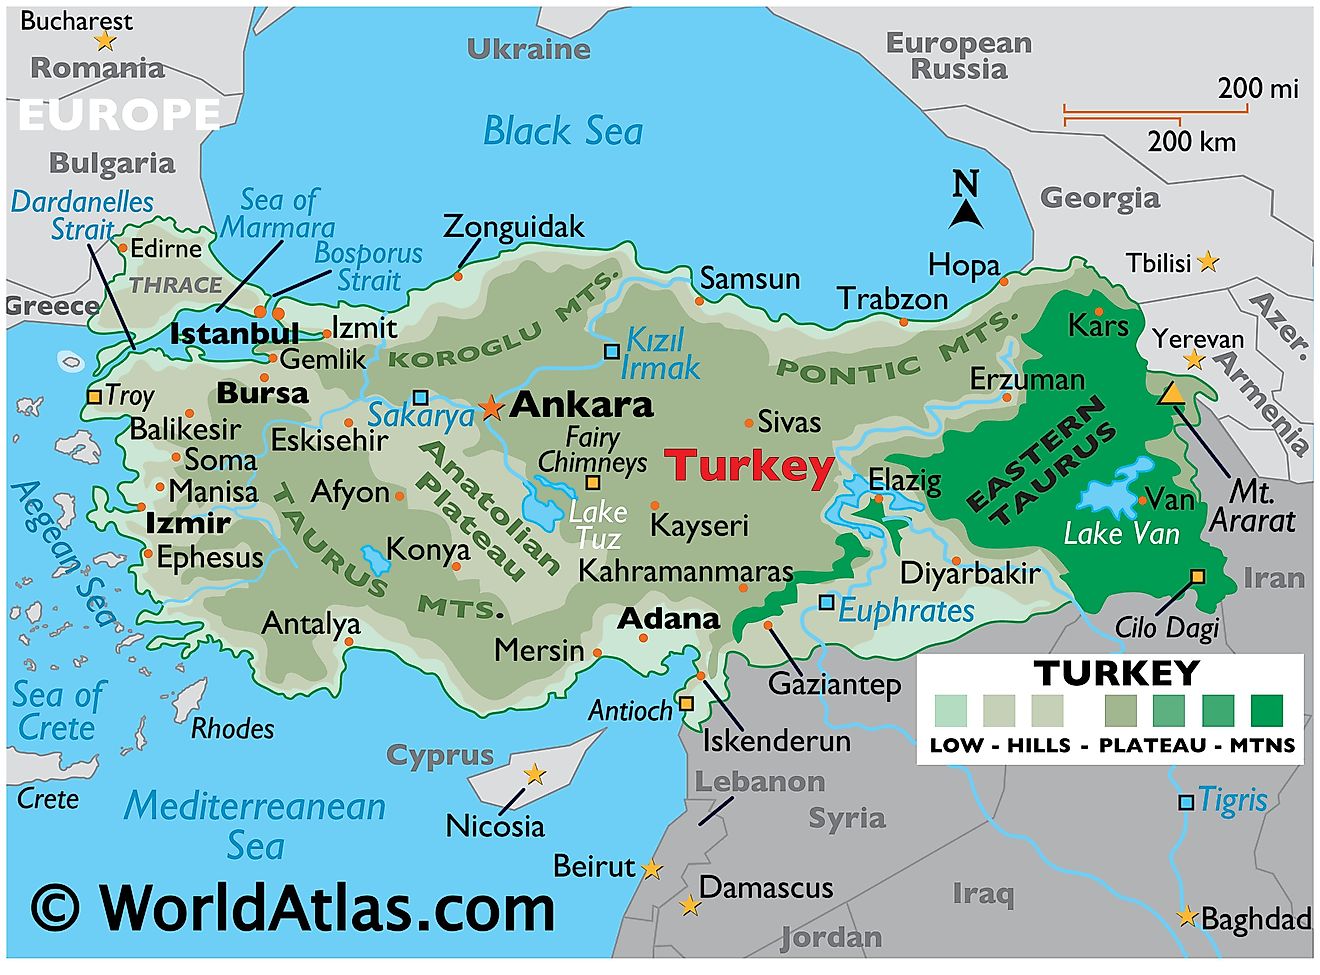 Phyiscal Map of Turkey with state boundaries, relief, major mountain ranges, rivers, lakes, important cities, and more.